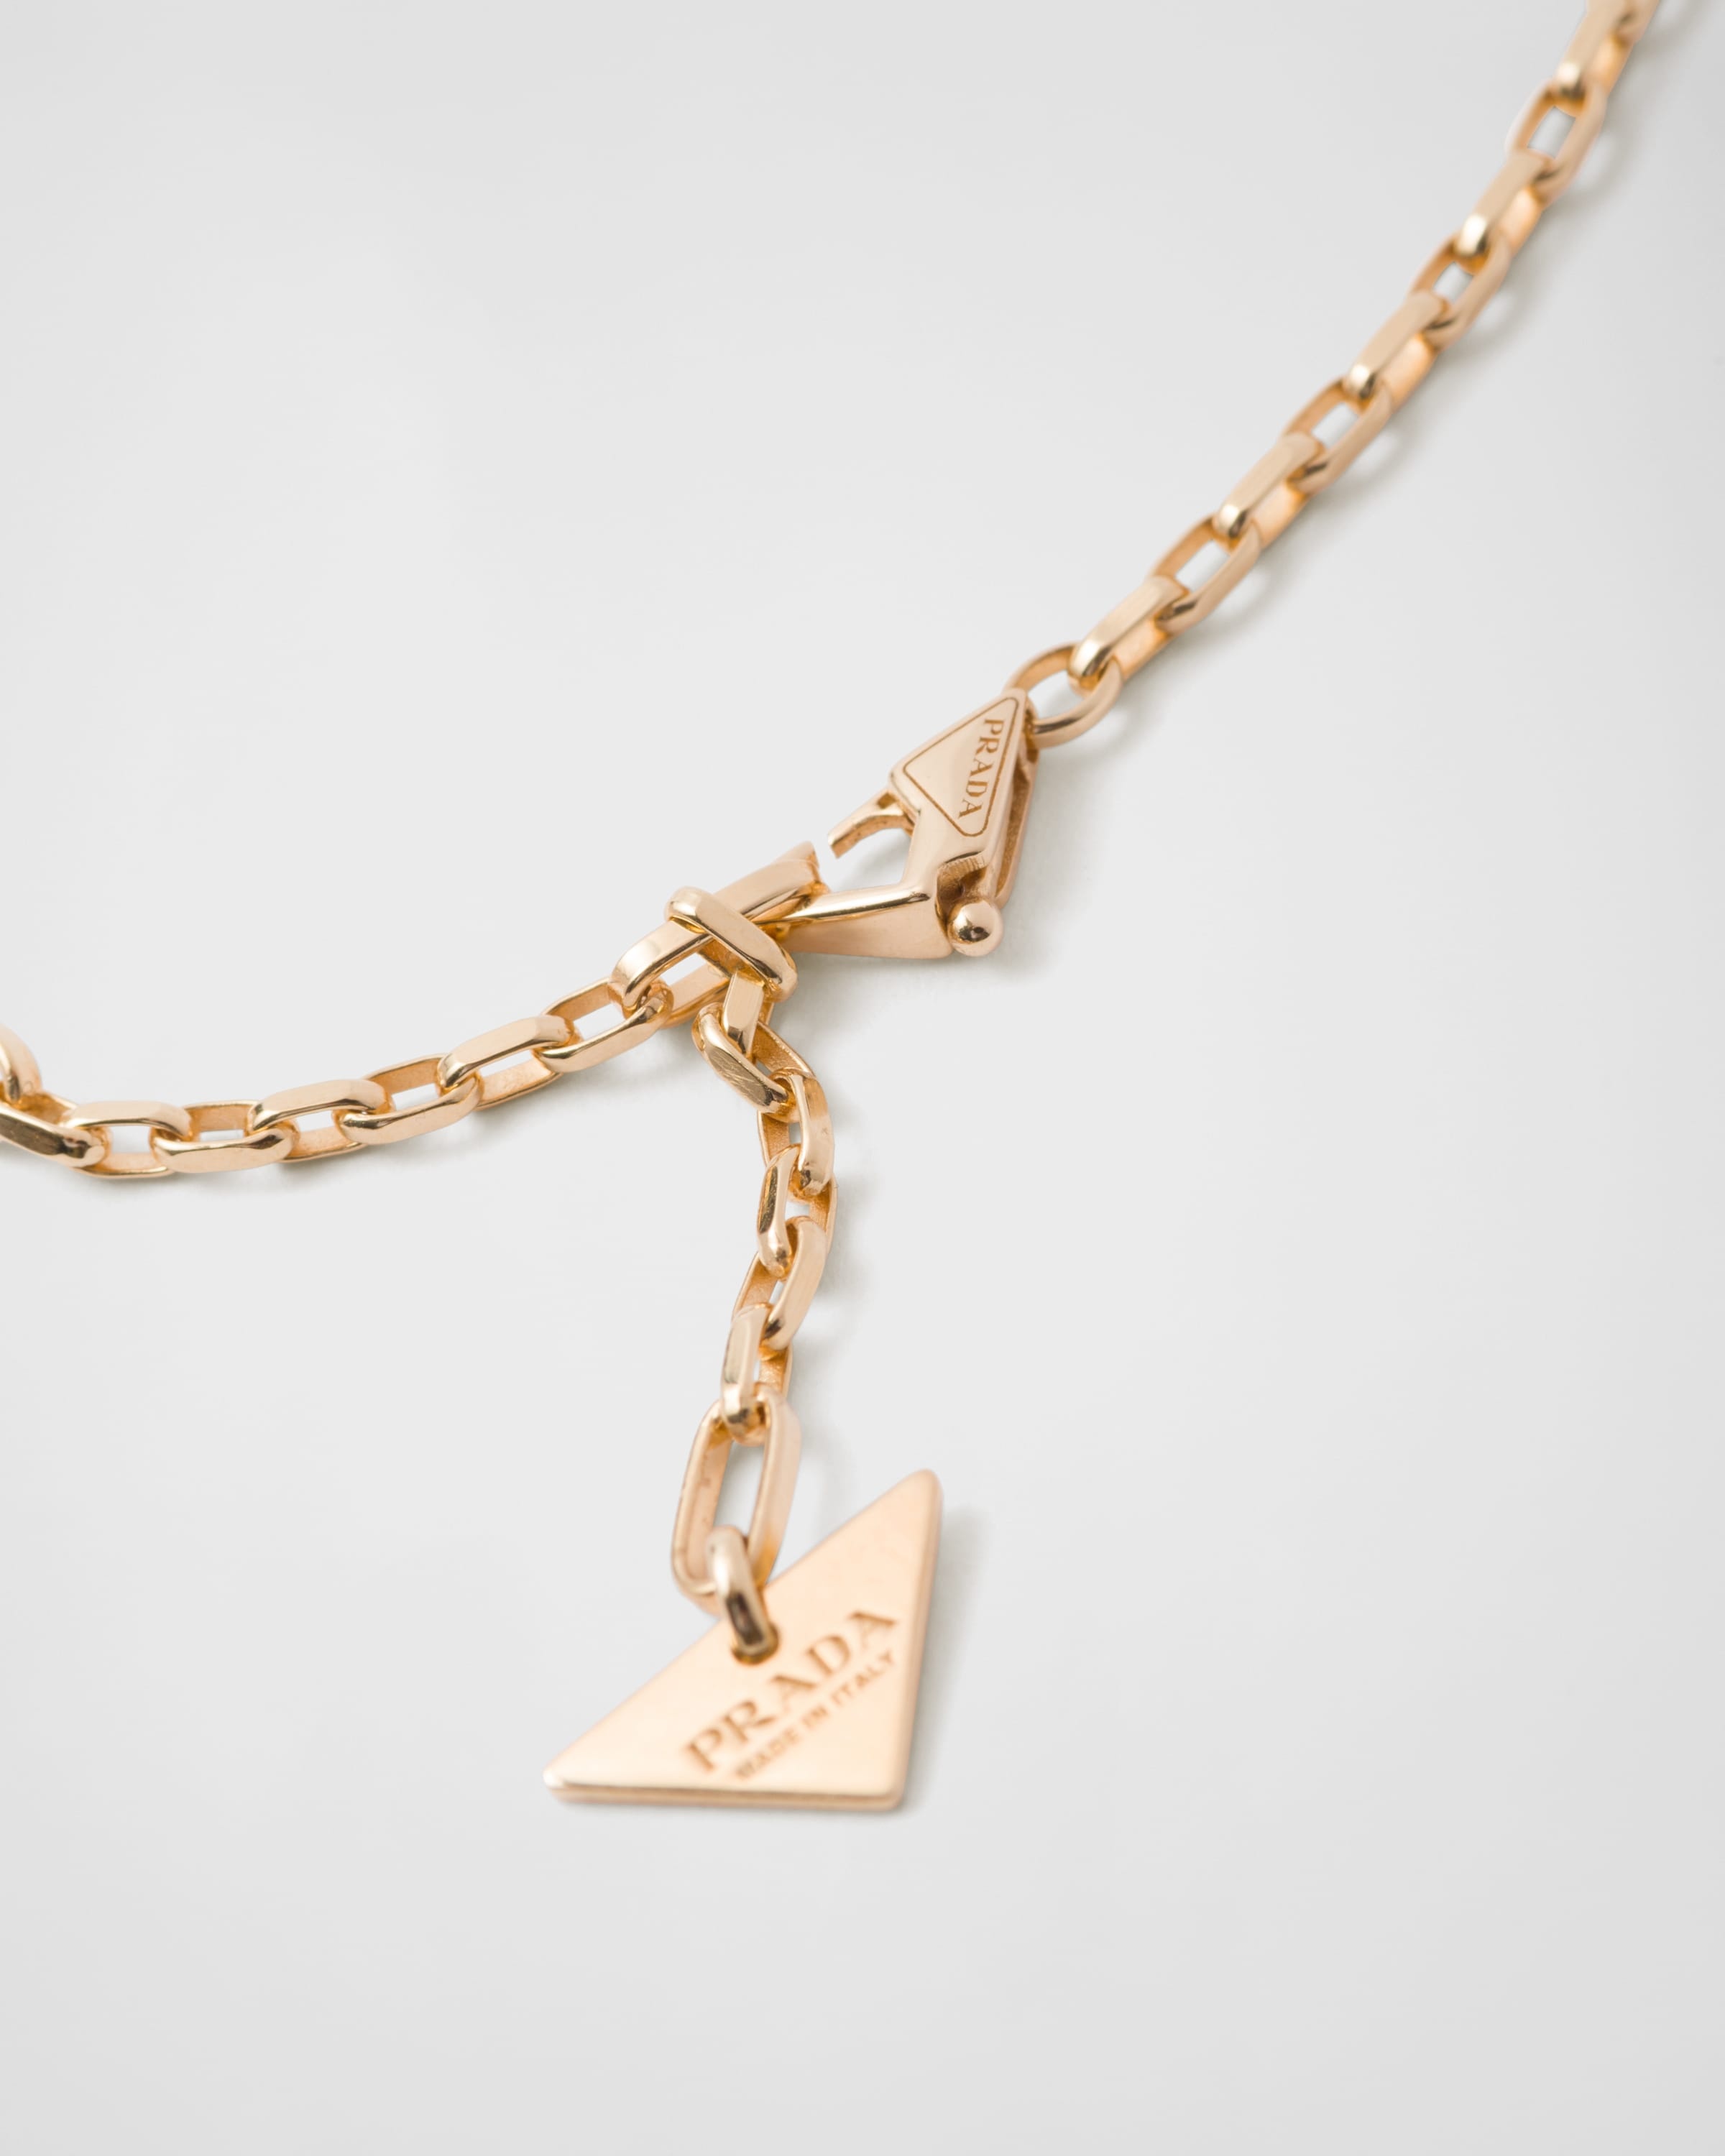 Eternal Gold Eternal mini triangle pendant necklace in yellow gold and diamonds - 5